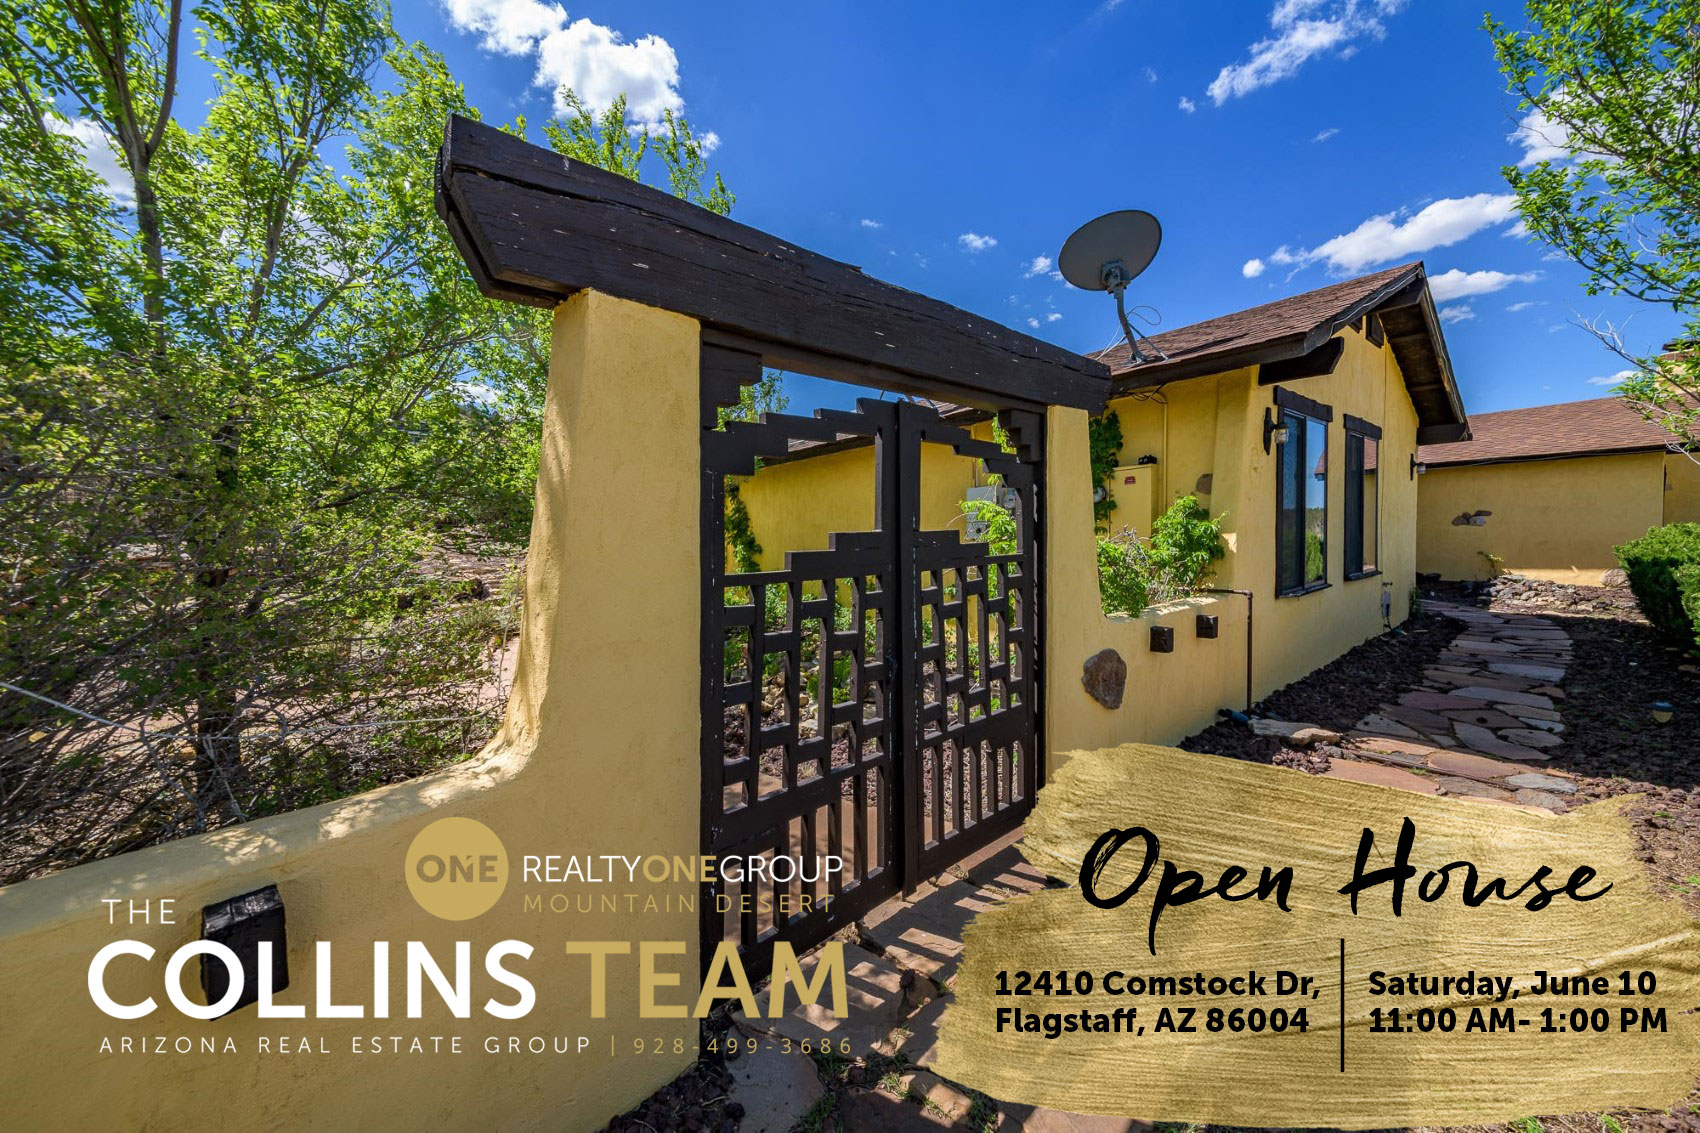 OPEN HOUSE 6/10, 11am - 1pm | 2+ Acre Hacienda-Style Home in Flagstaff